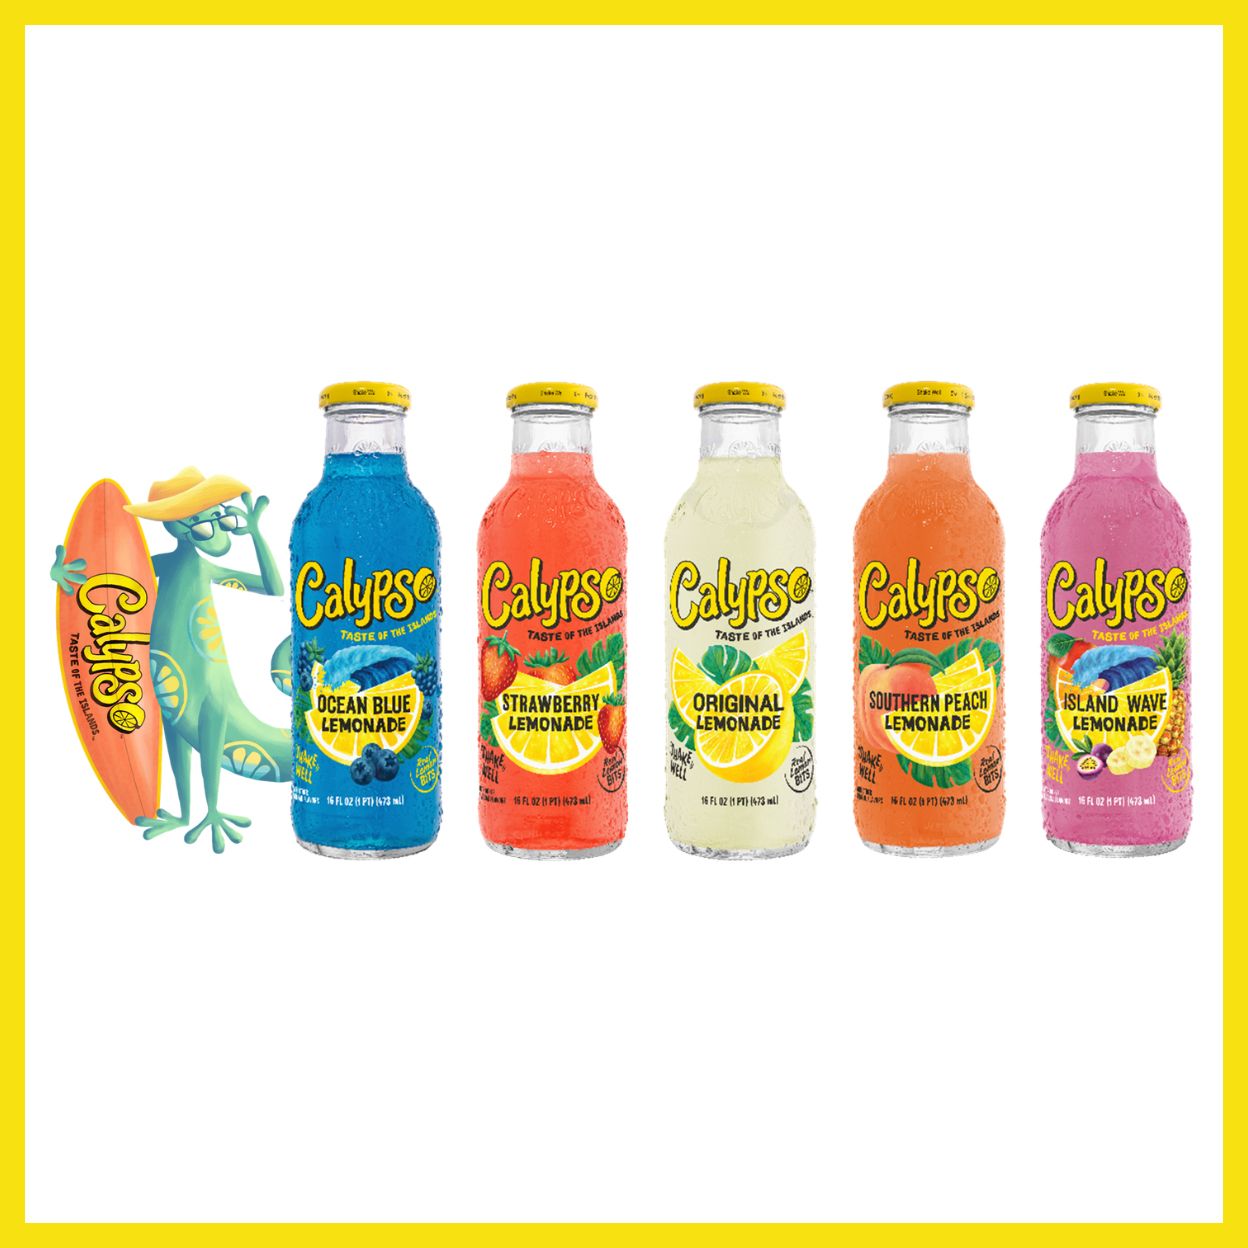 Calypso Lemonade Partners with Brand Central for New Product Categories